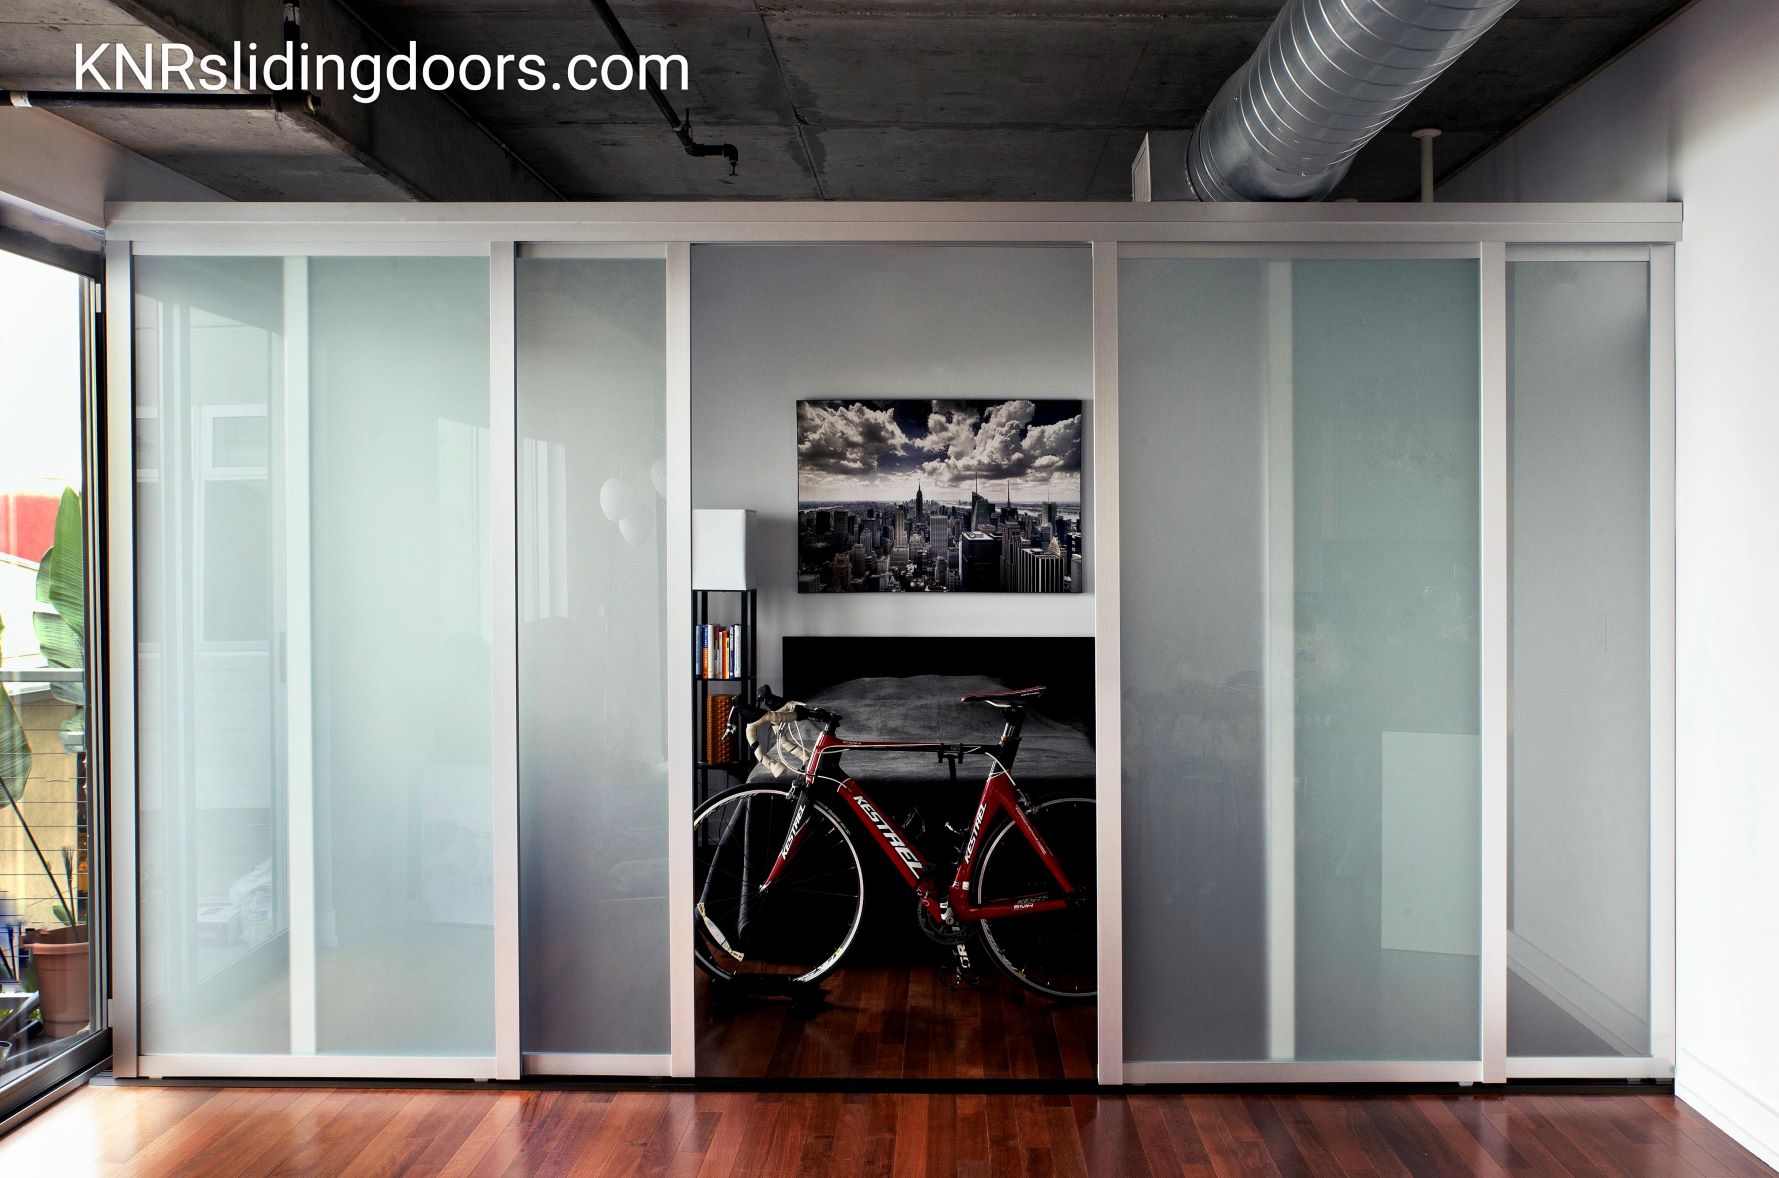 Modern interior with sliding glass doors partially revealing a bedroom and a bicycle in the foreground.